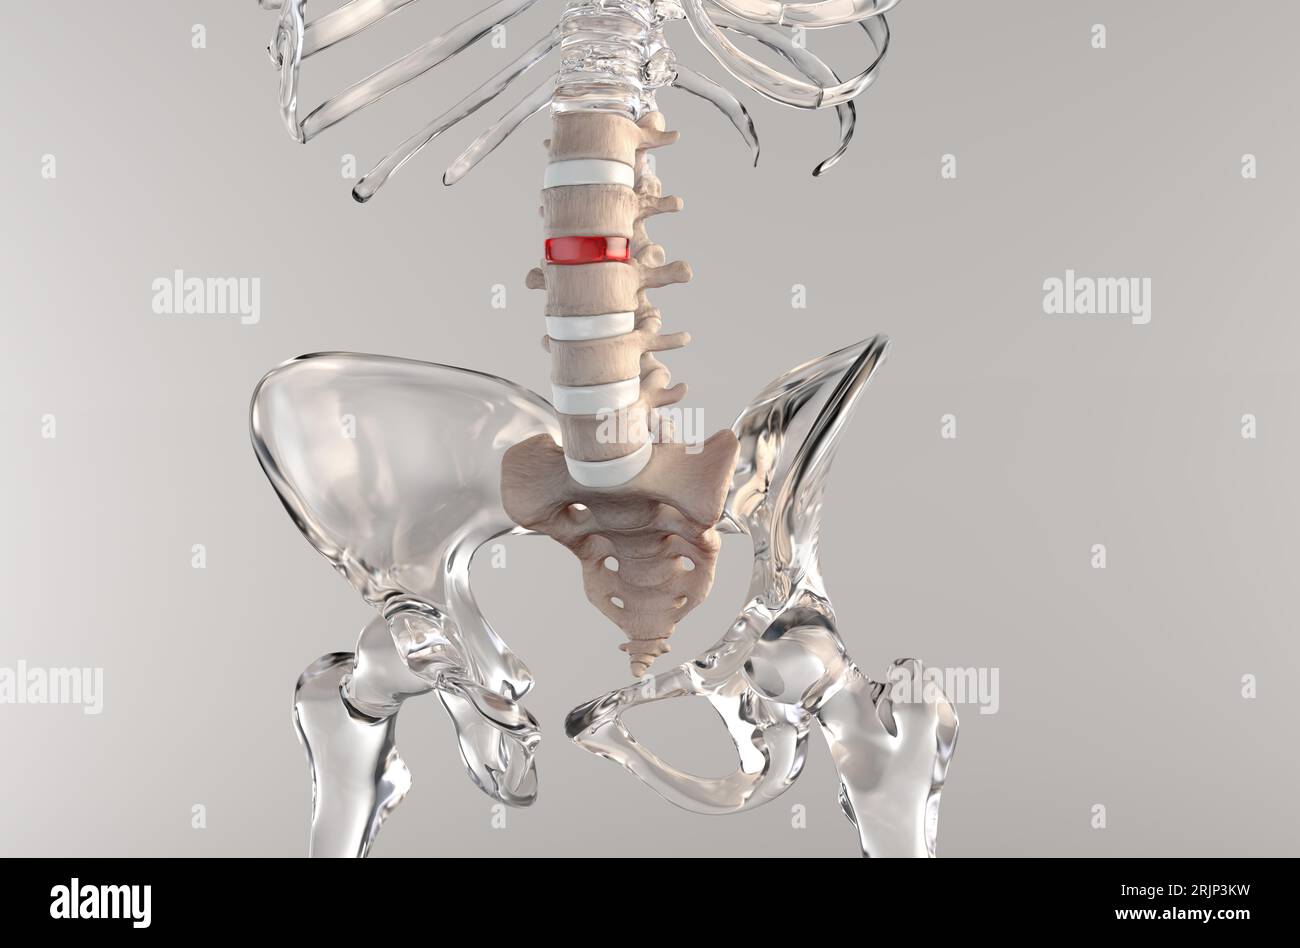 3D medical illustration of a human skeleton suffering stenosis in the lumbar spine region Stock Photo